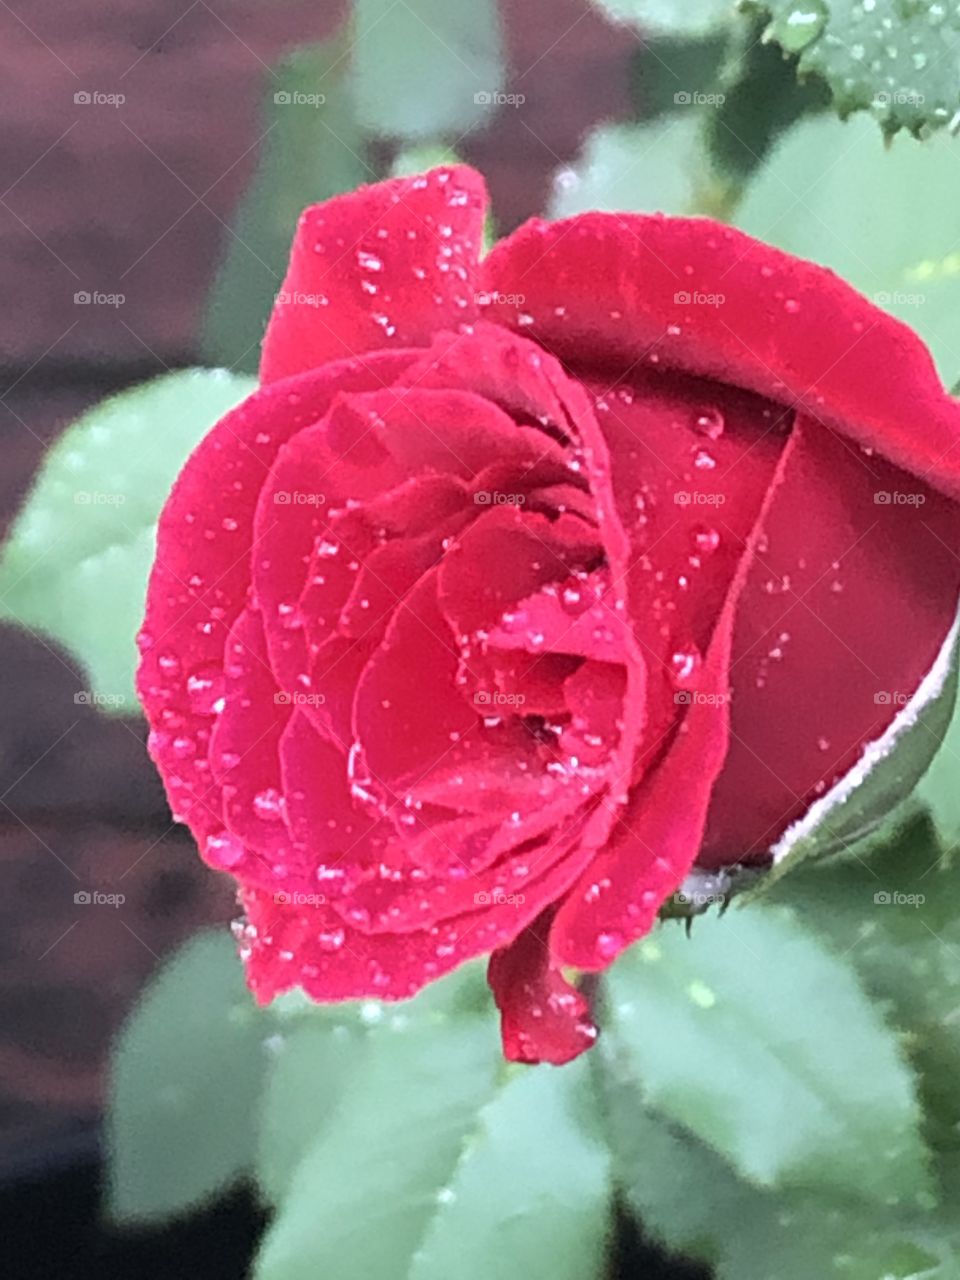 Raindrops on a red rose